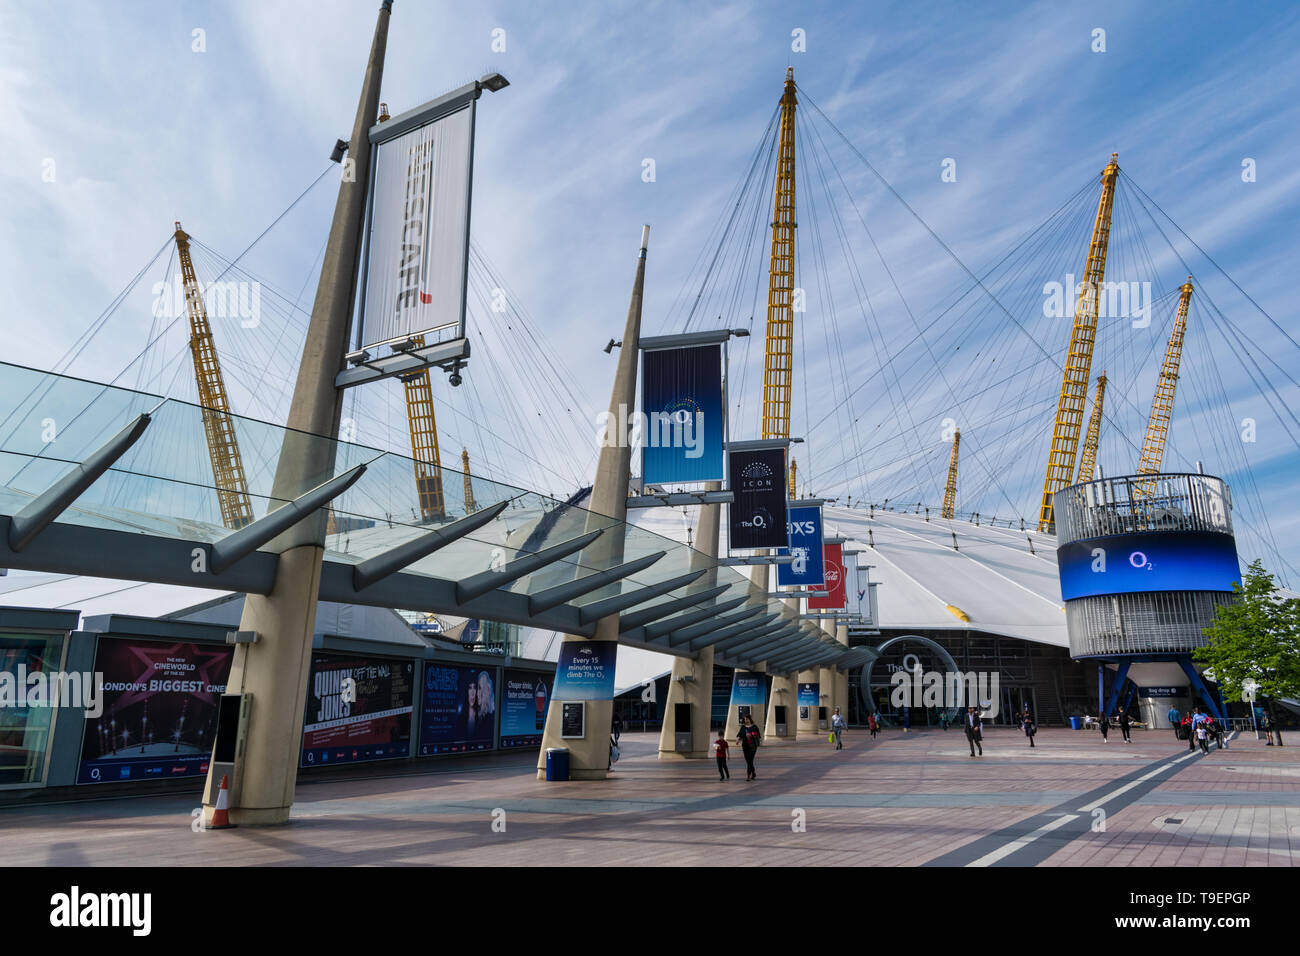 LONDON, UNITED KINGDOM - May 15, 2019: Main entrance to the O2 Arena  in London, Engalnd. Stock Photo